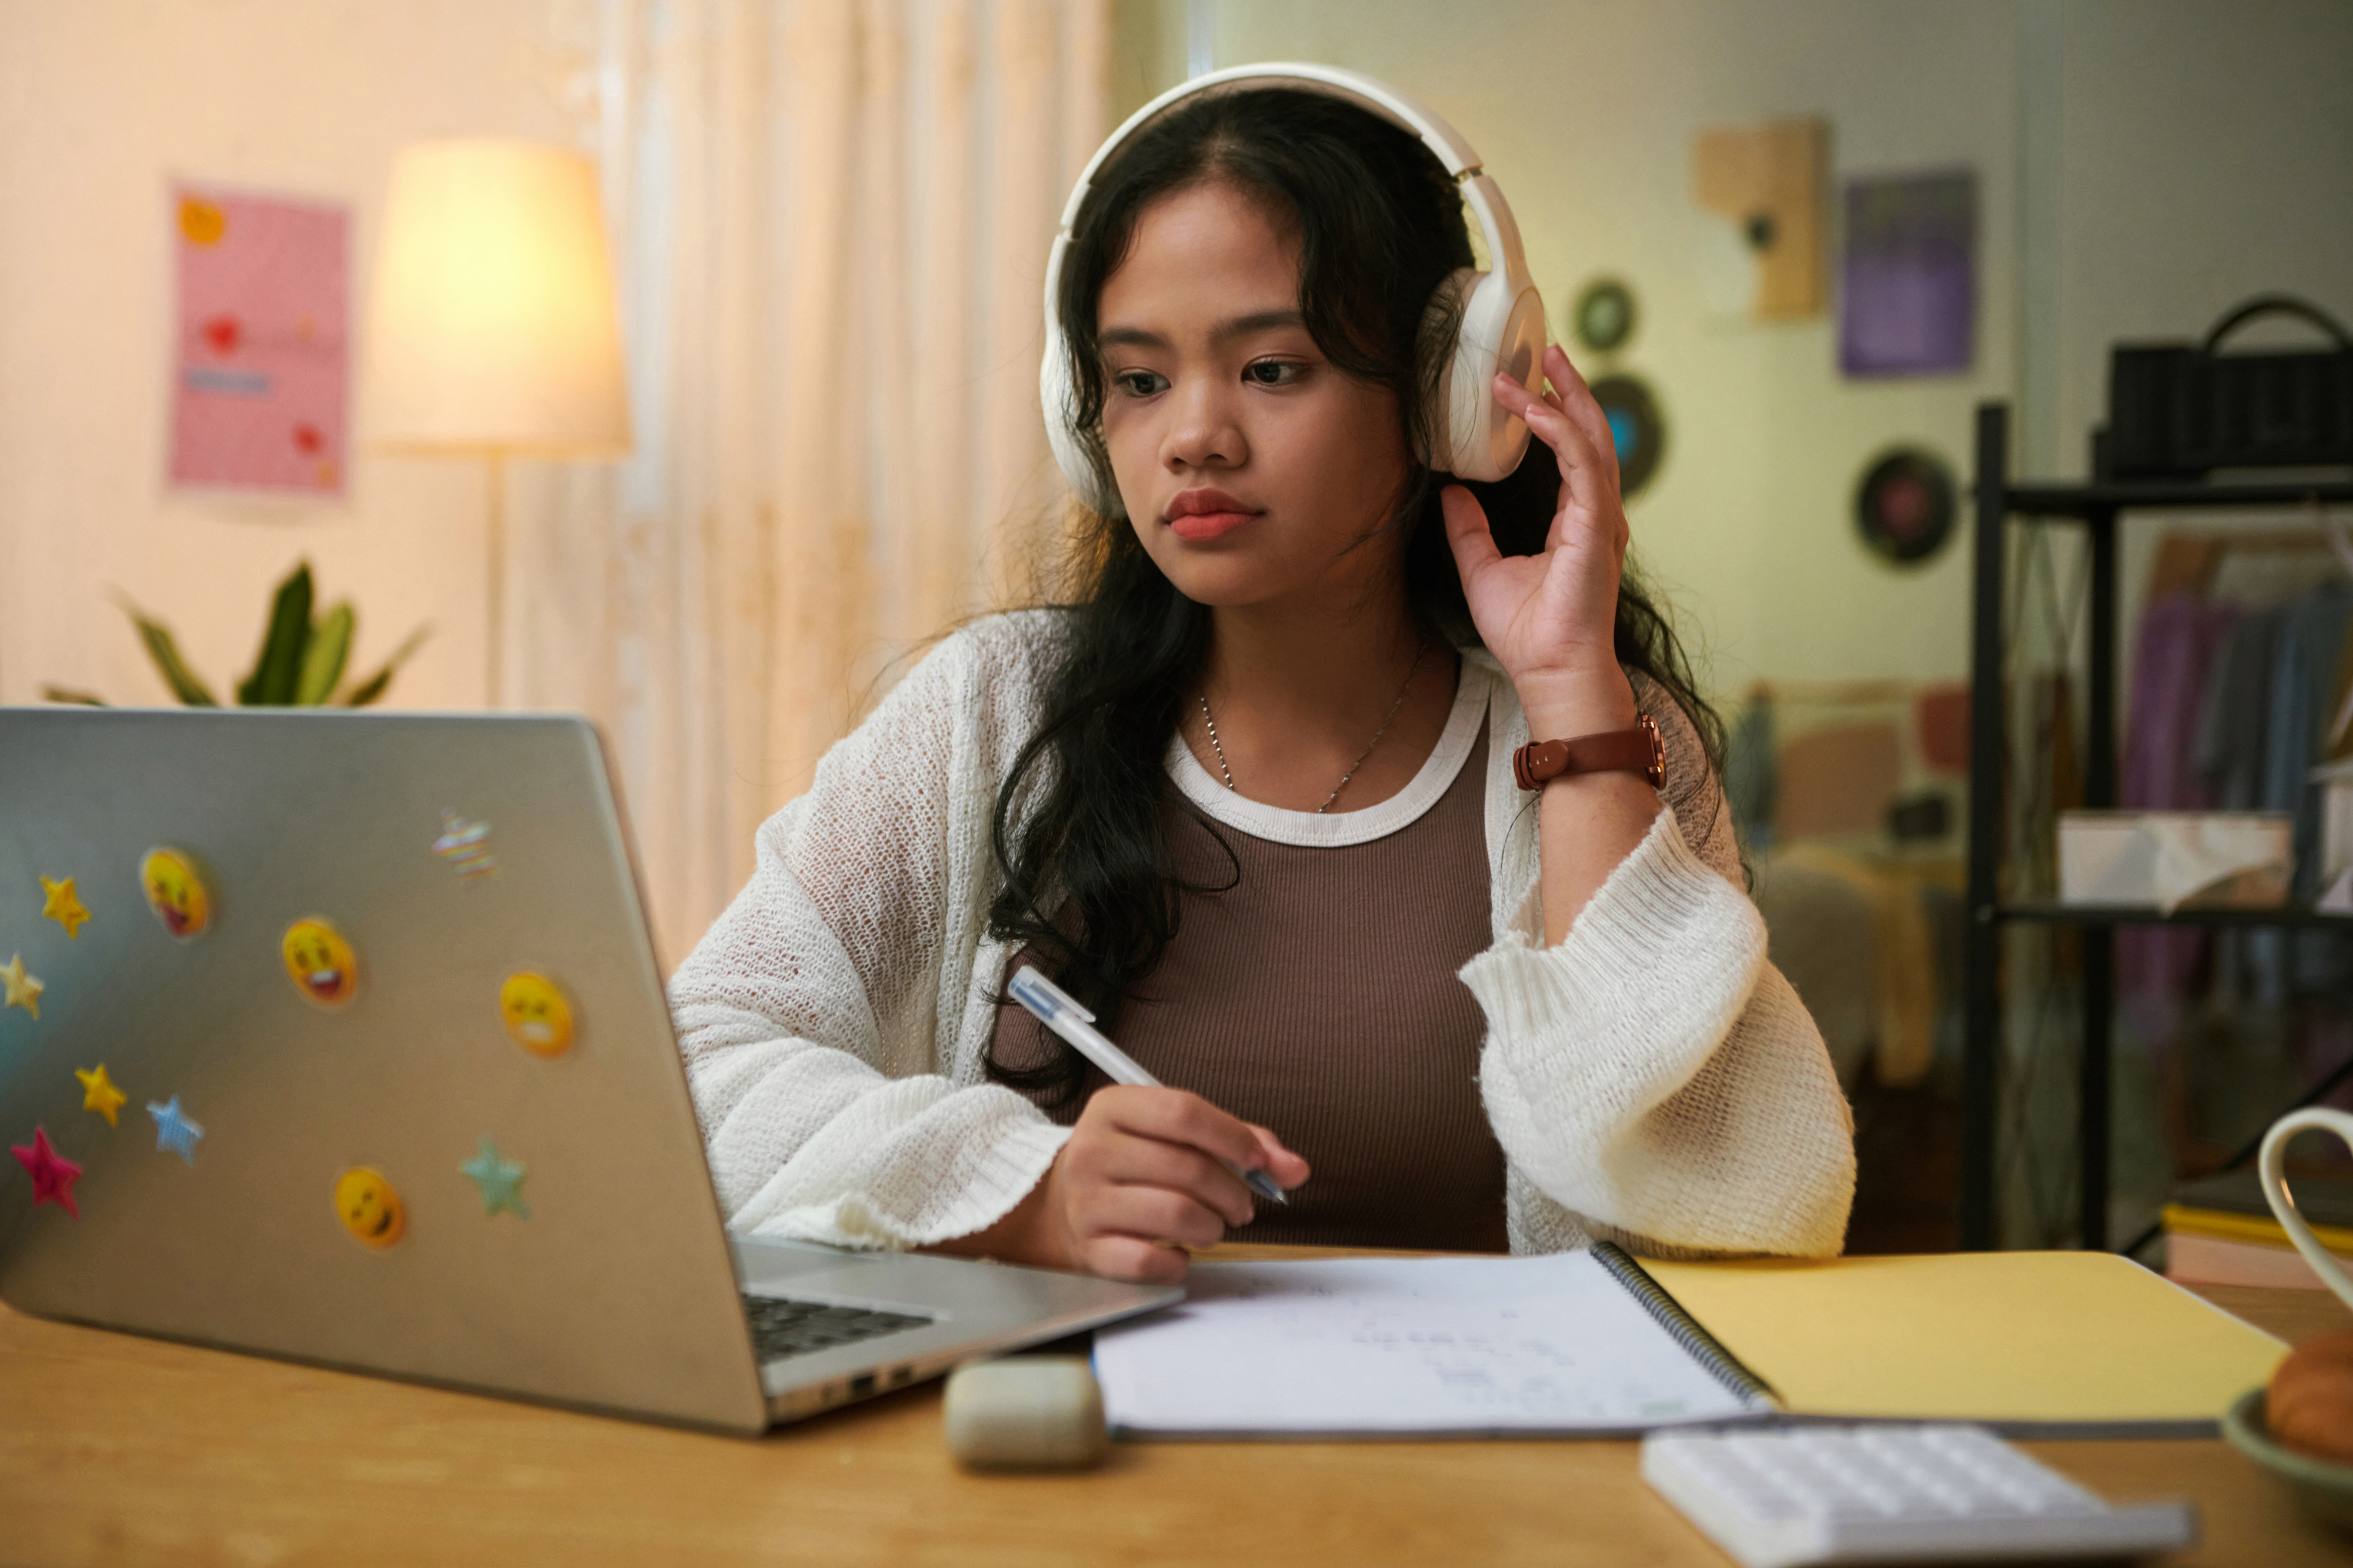 Young woman studying at a desk wearing headphones with a laptop and notes in front of her